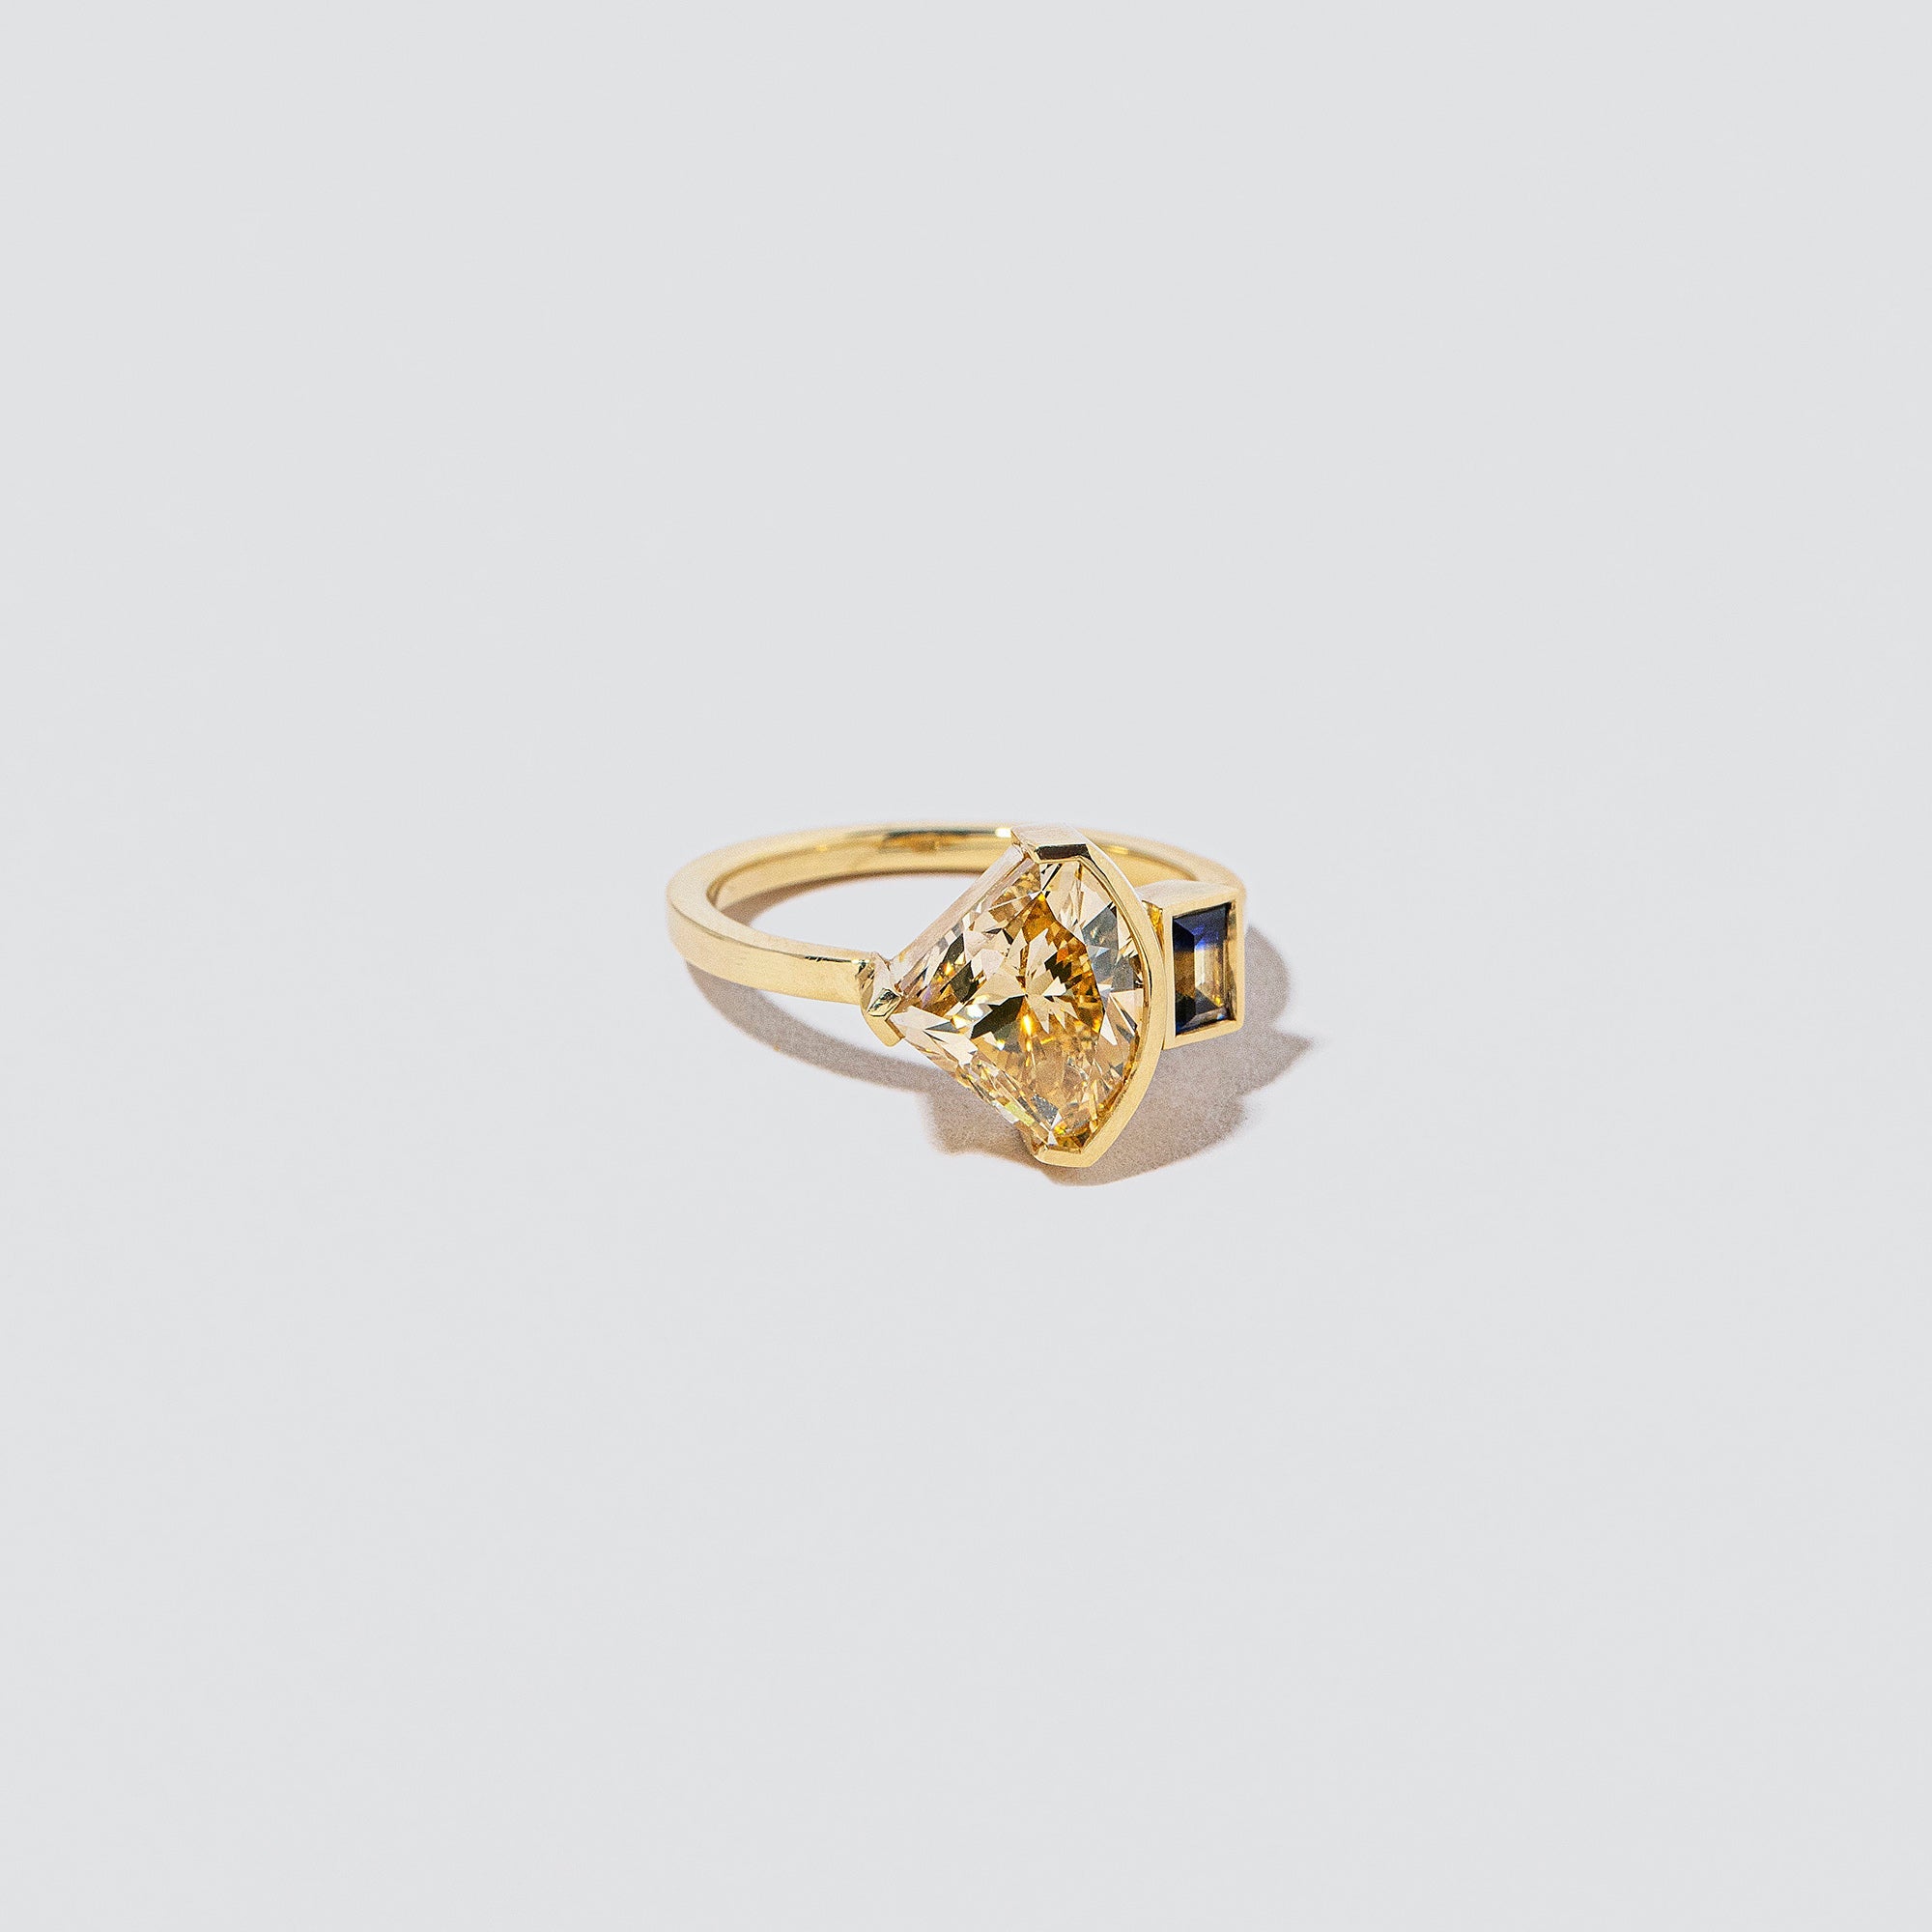 product_details:: Revival Ring on light color background.